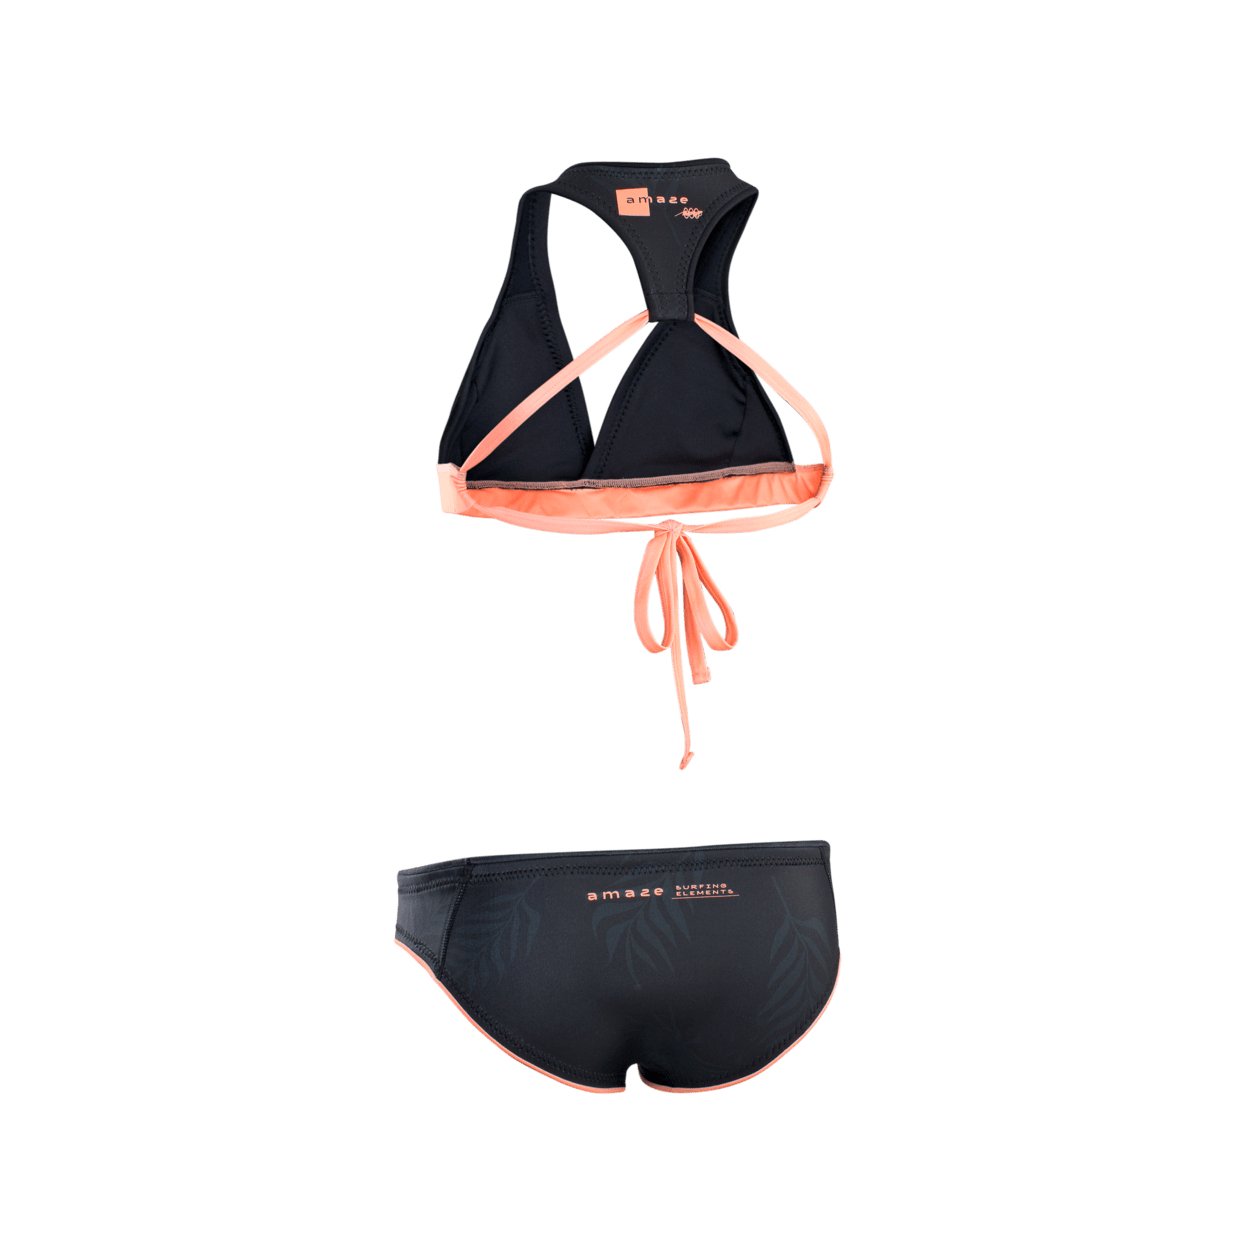 ION NeoKini 1.5 2022 - Worthing Watersports - 9010583052090 - Wetsuits - ION Water